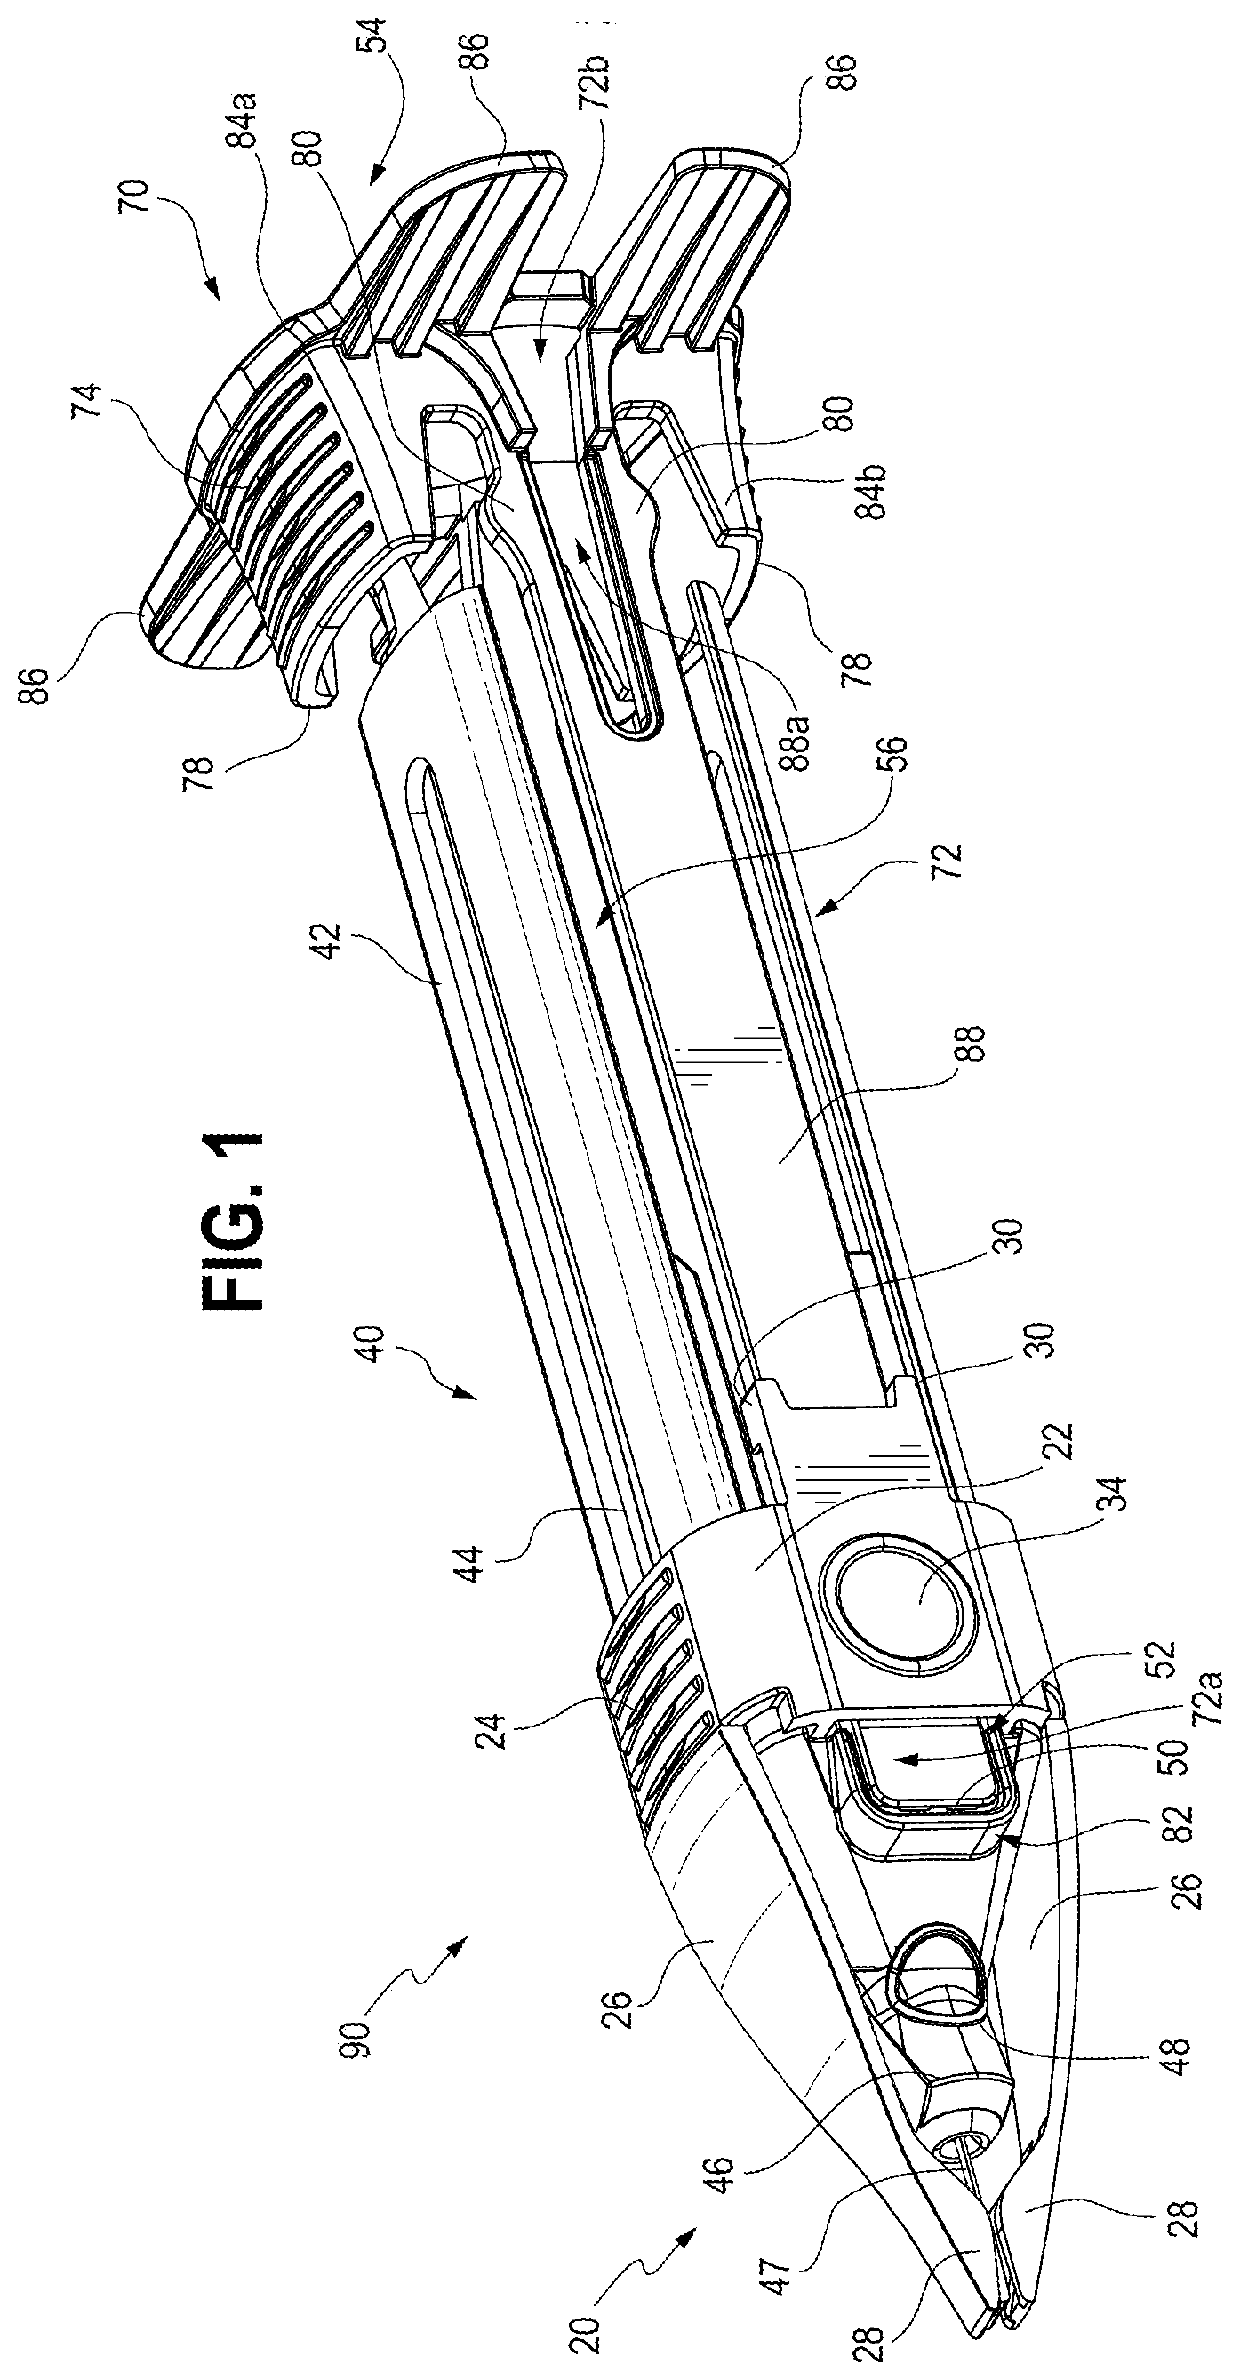 Dermal injection guide device